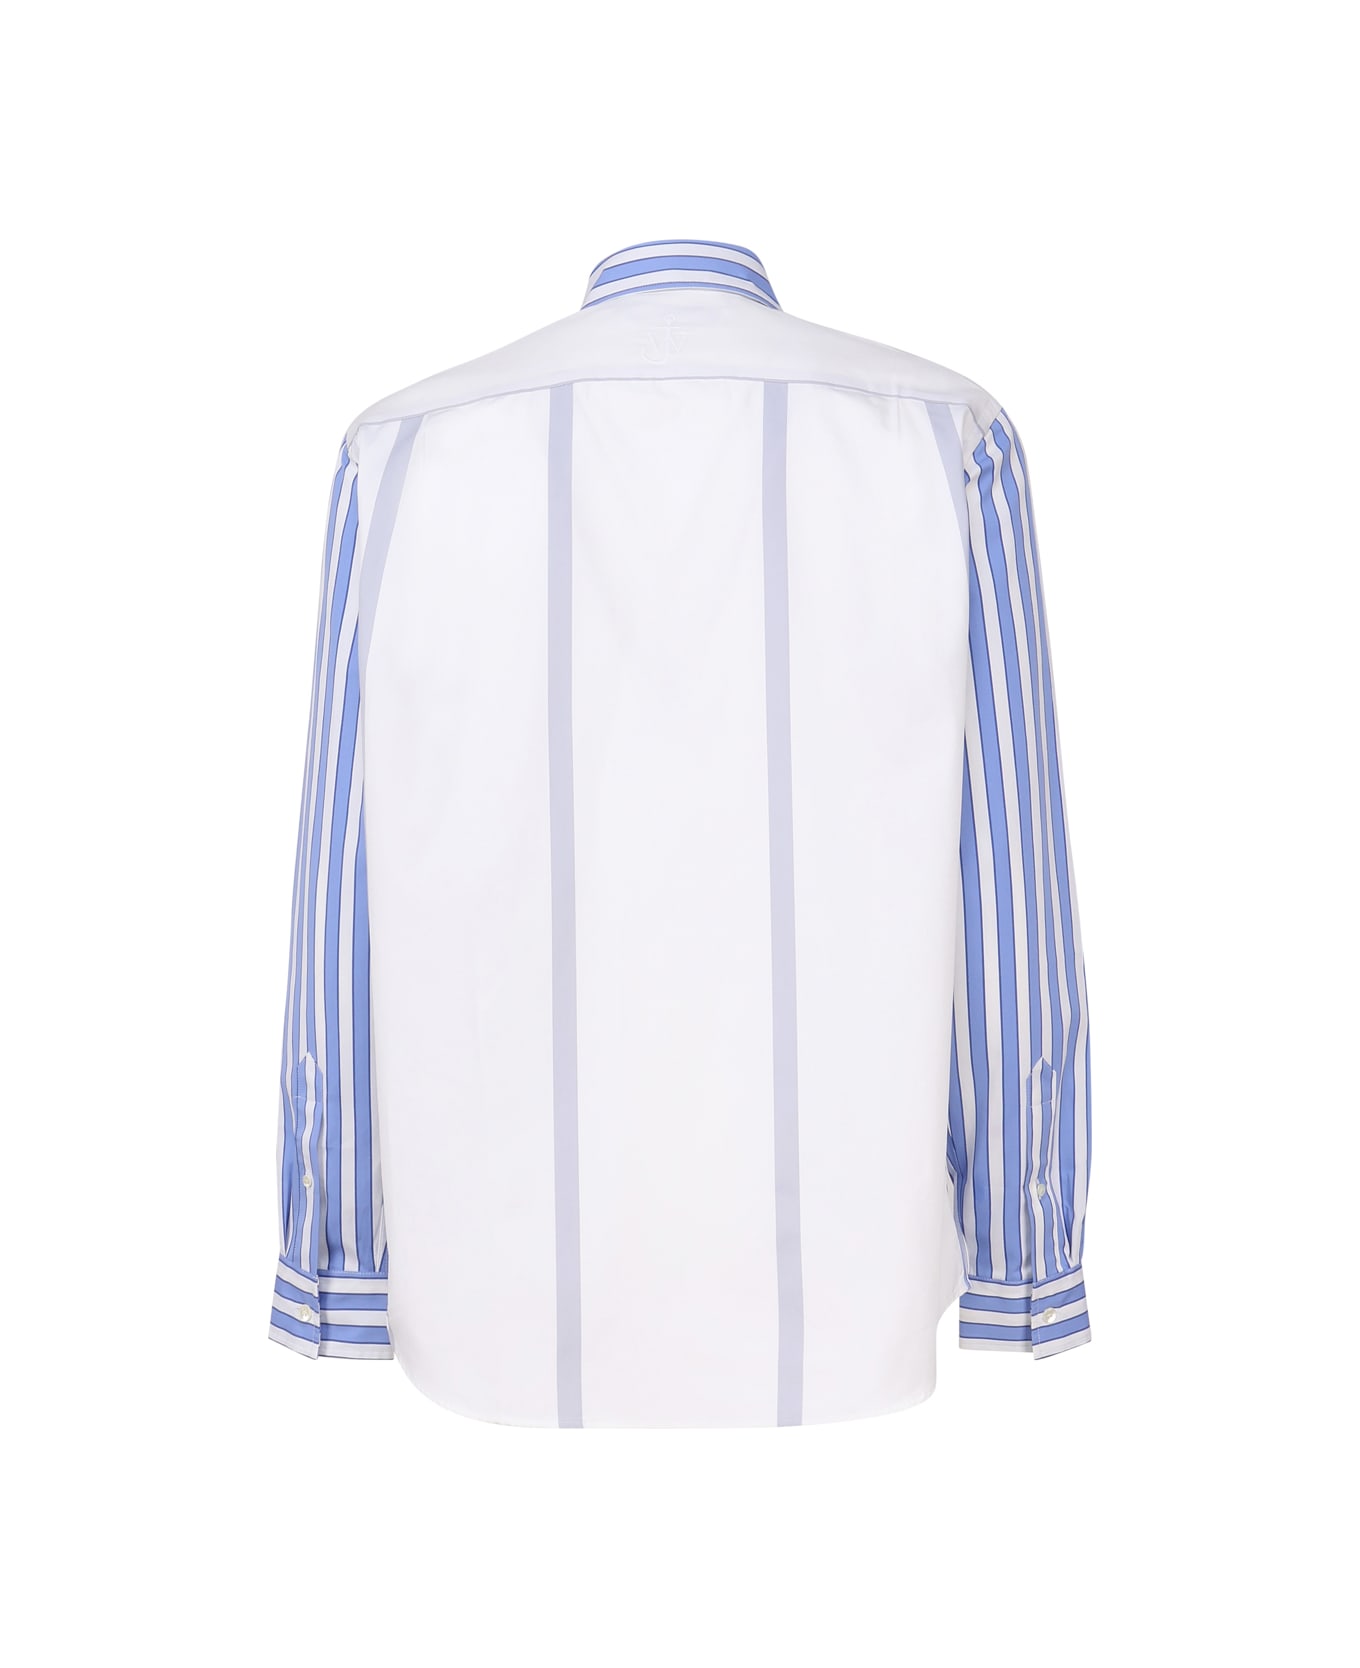 J.W. Anderson Striped Shirt With Insert Design - Light blue/white シャツ